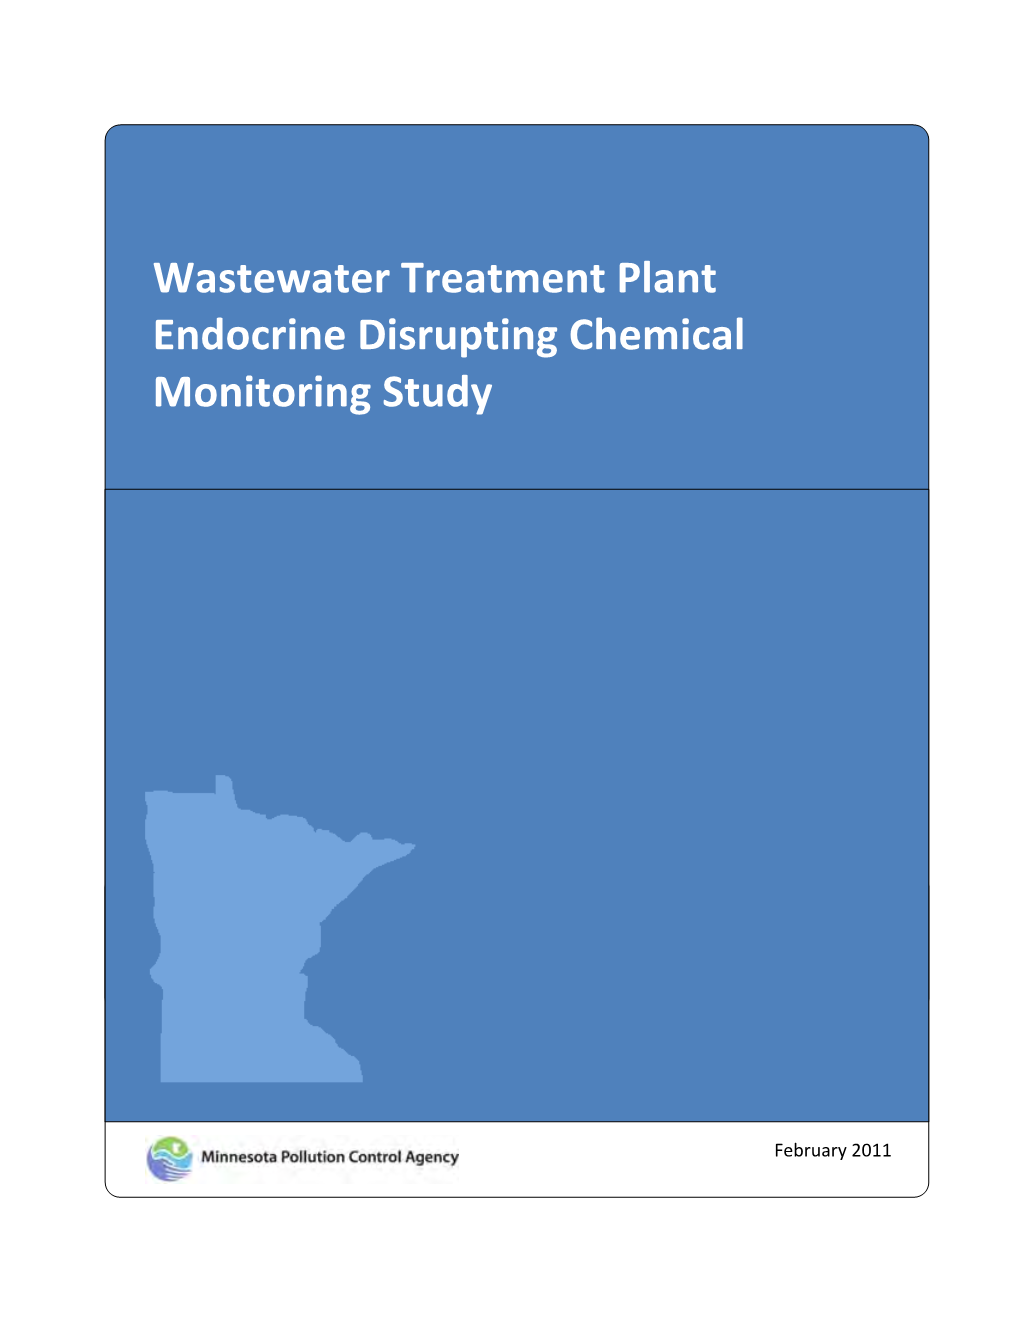 Wastewater Treatment Plant Endocrine Disrupting Chemical Monitoring Study